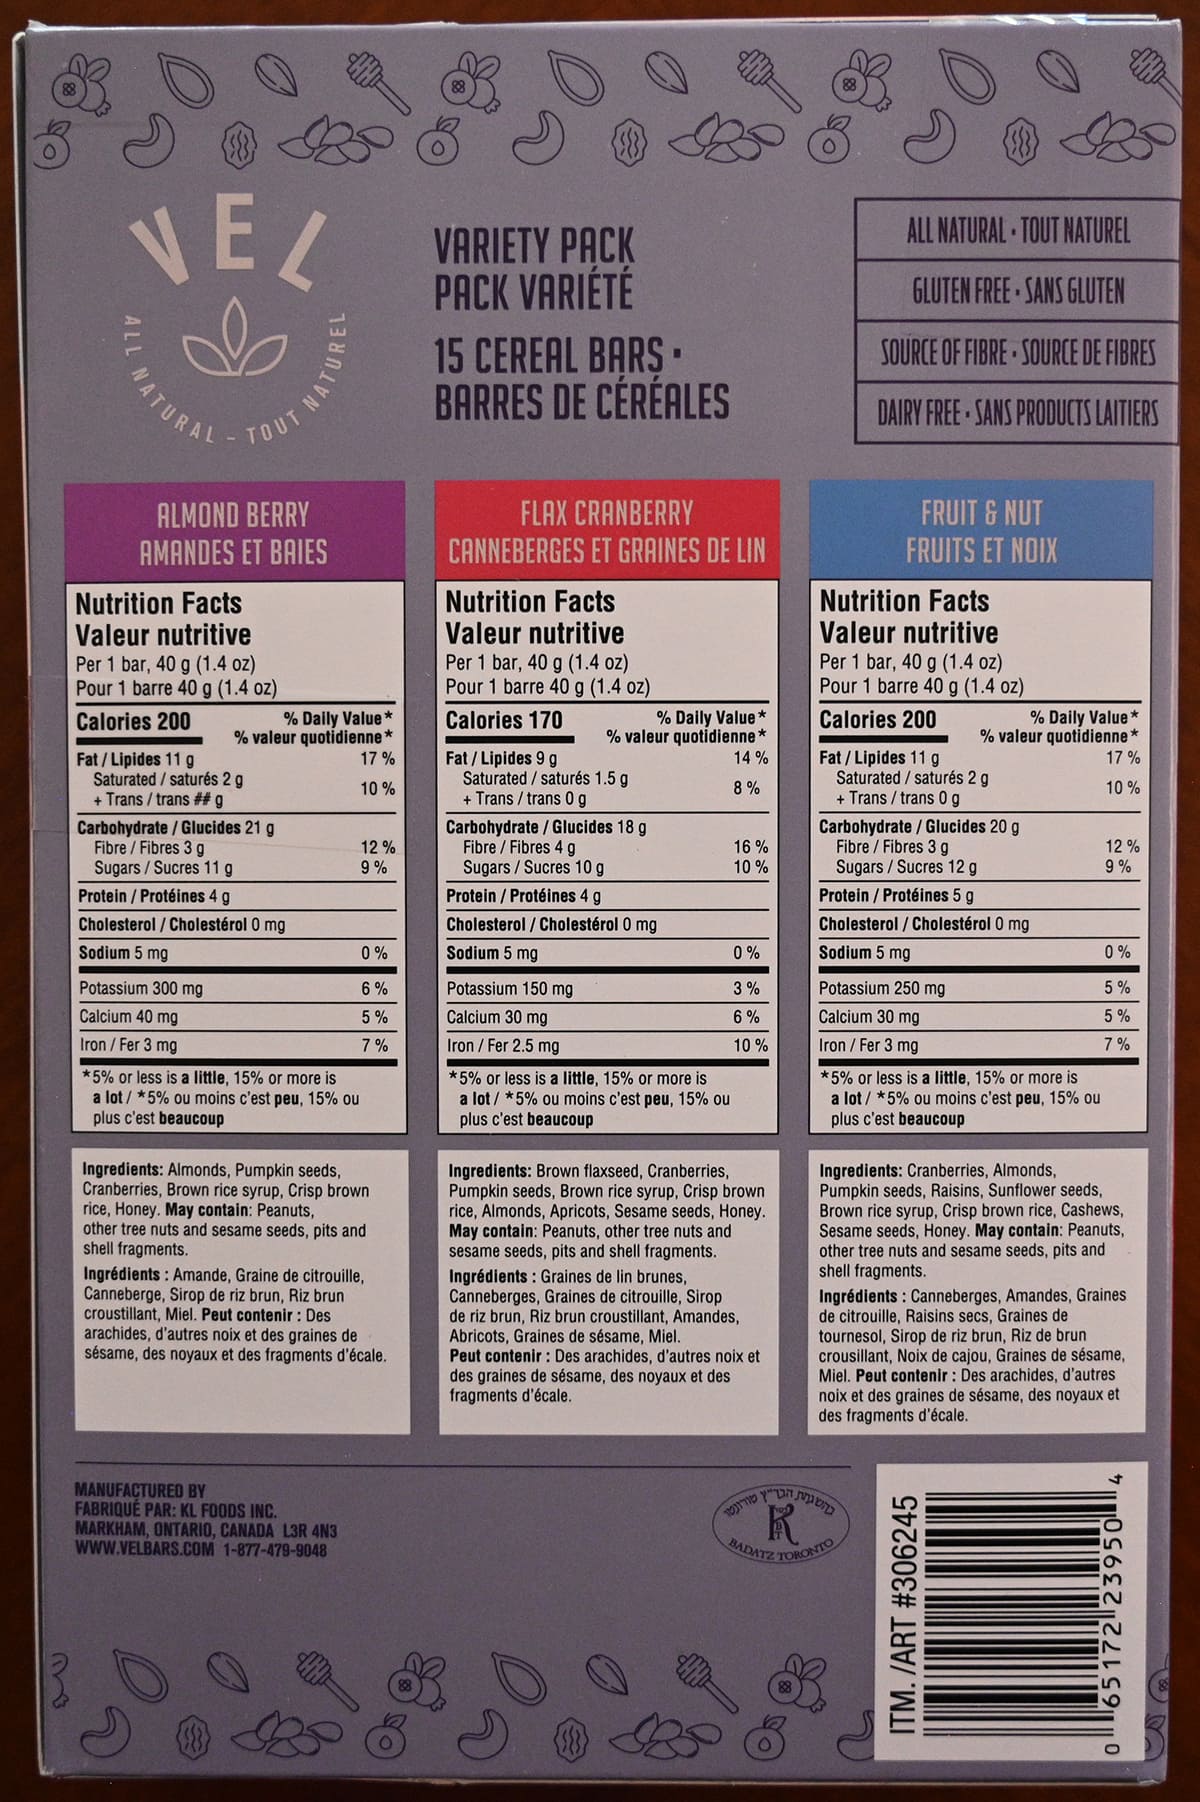 Image of the back of the box of the Vel cereal bars showing ingredients, nutrition facts and product description.